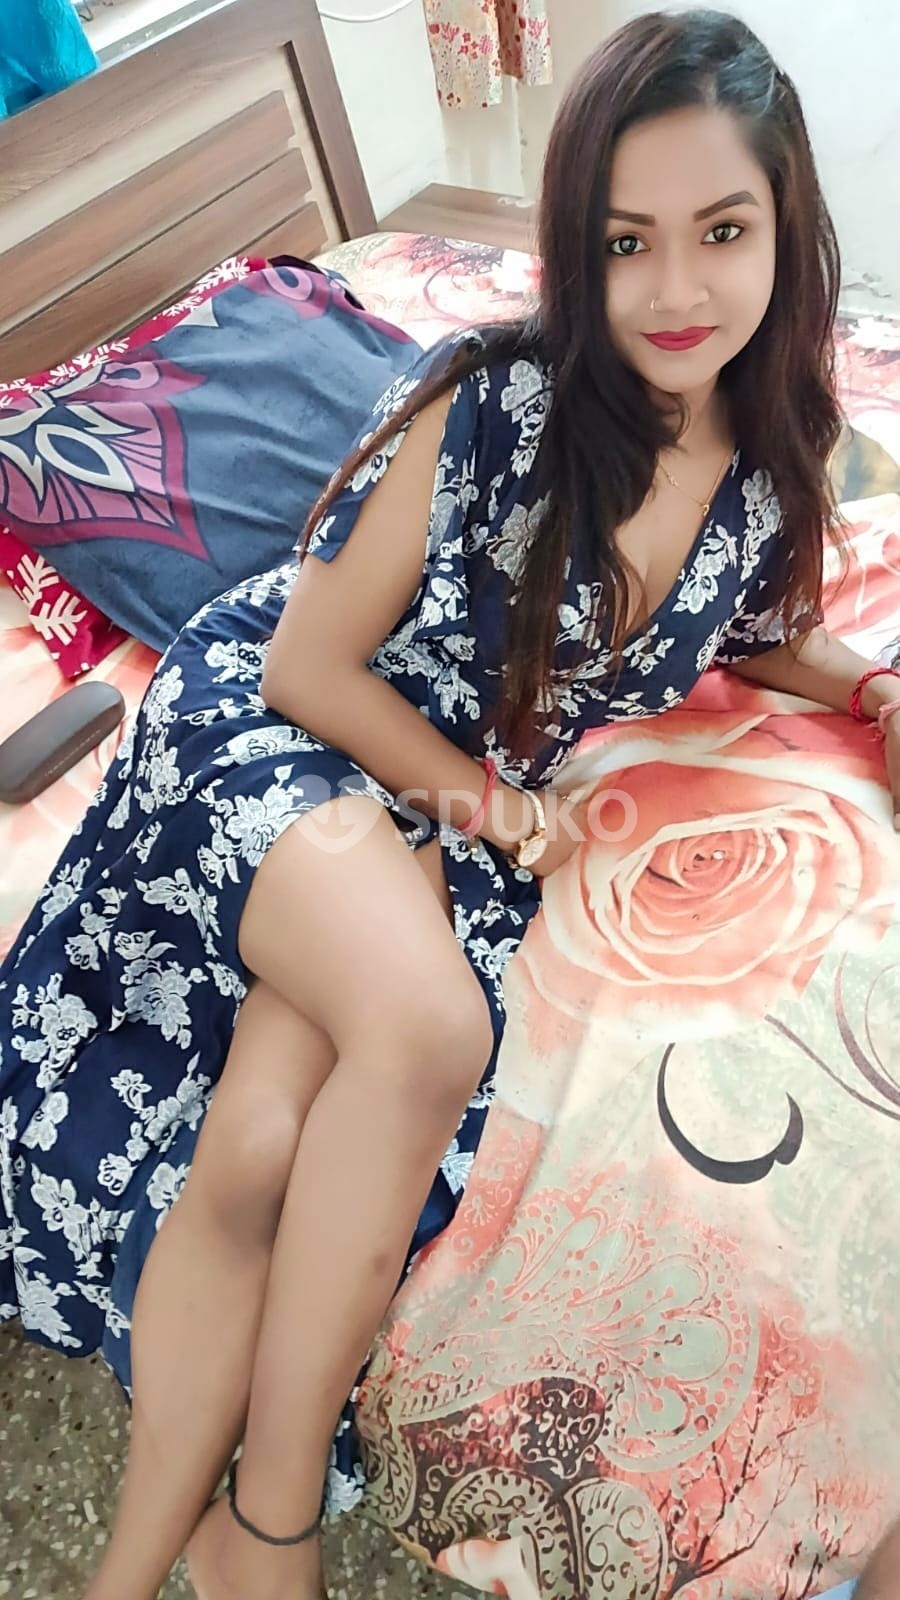 DELHI💥 VIP HIGH REQUIRED AFFORDABLE CHEAPEST PRICE UNLIMITED ENJOY HOT COLLEGE GIRL HOUSEWIFE HOTEL AND HOME SERVICE 